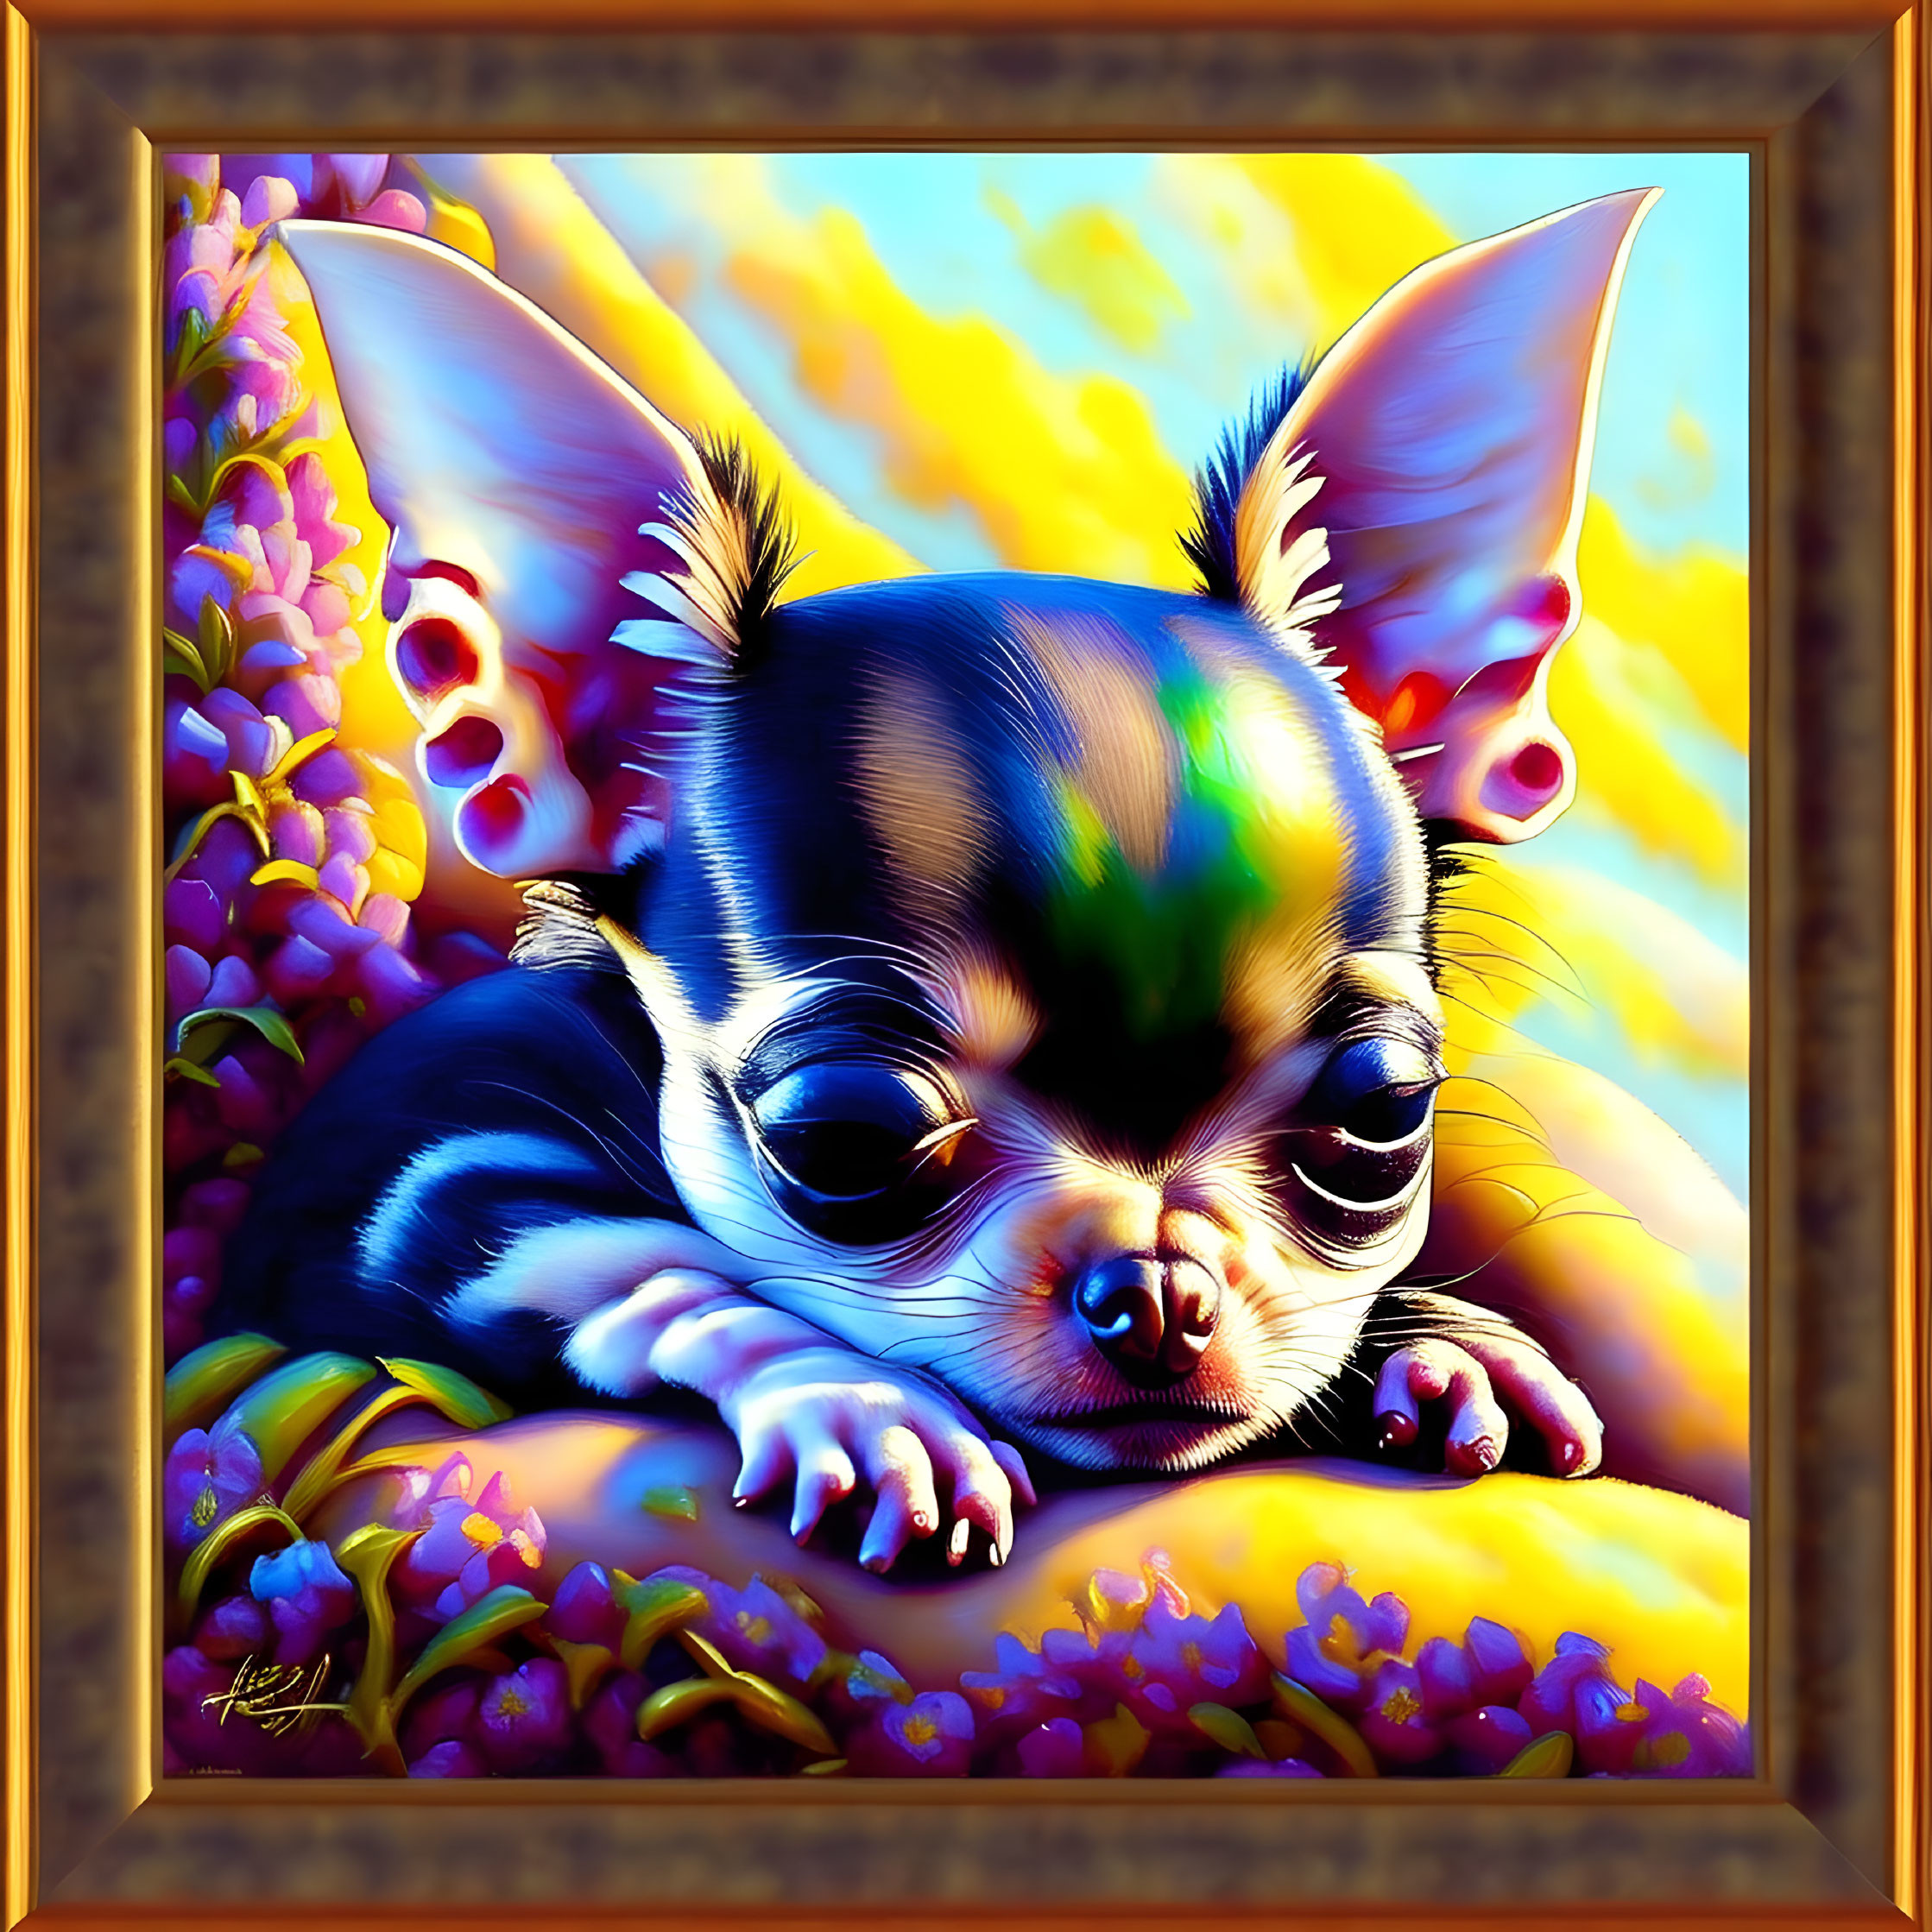 Colorful Chihuahua surrounded by flowers under yellow sky